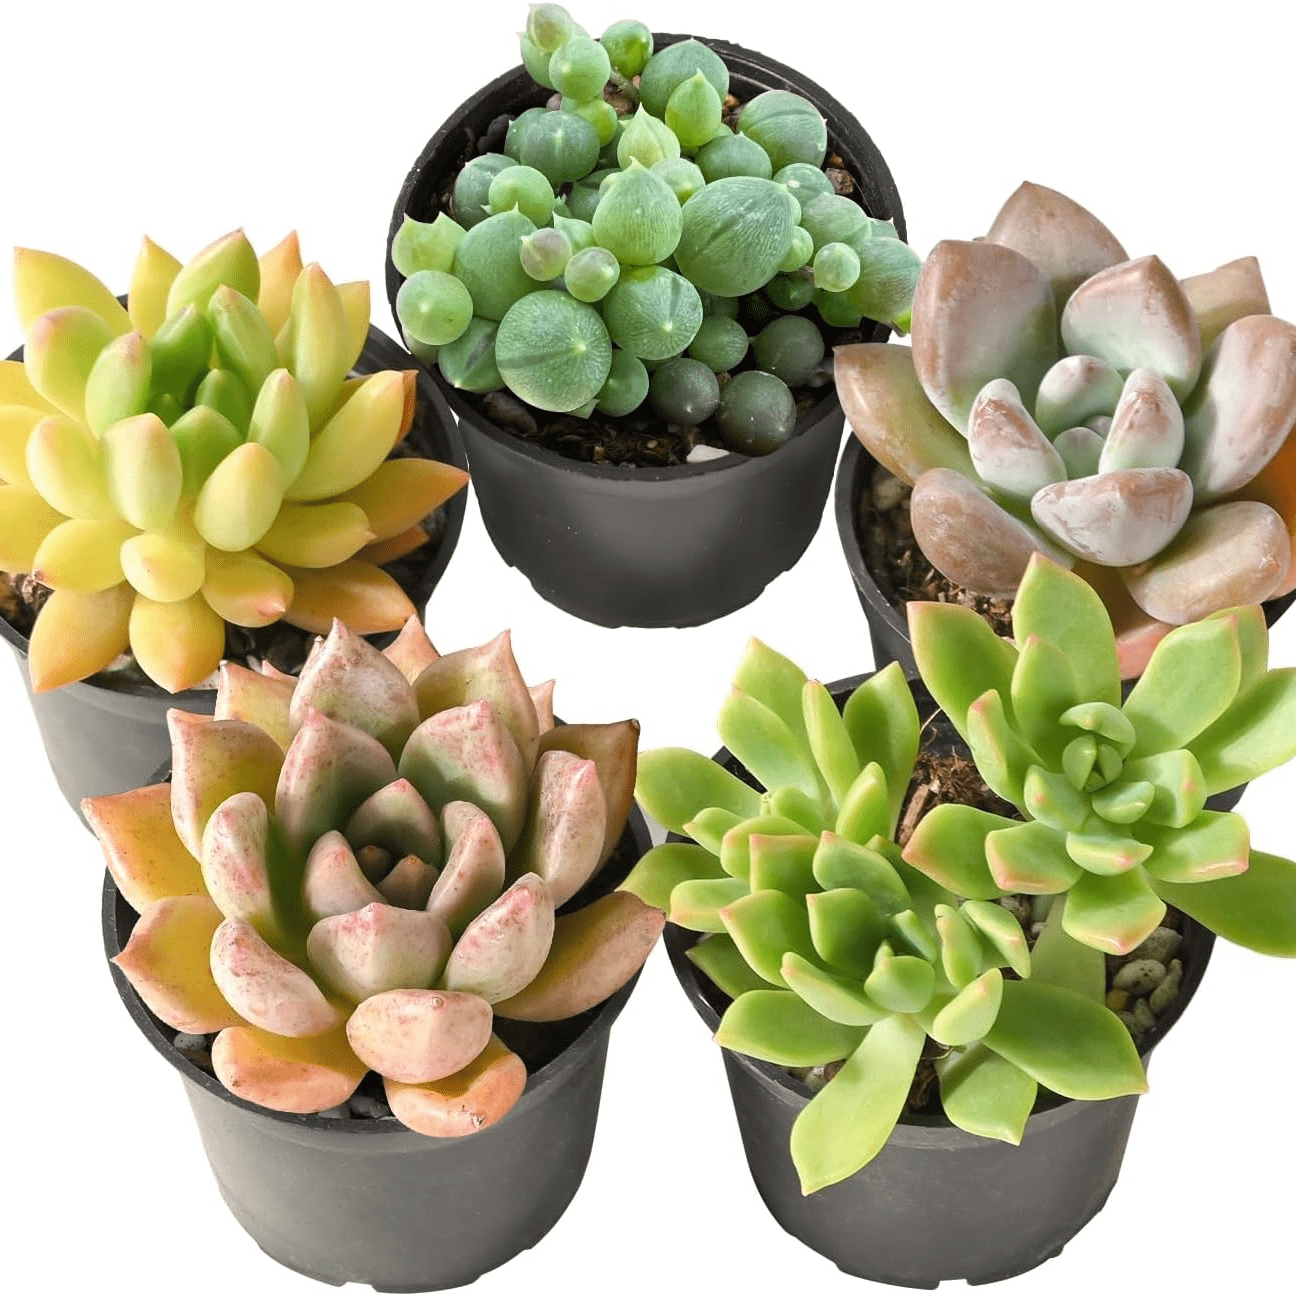 

Assorted Succulent Plant Pack Bulk Collection - 5 Pack Of 2in Live Mini Succulent Plants, Low Maintenance, Mixture Of Colors & Textures - Wedding And Party Favors, Gift & Garden